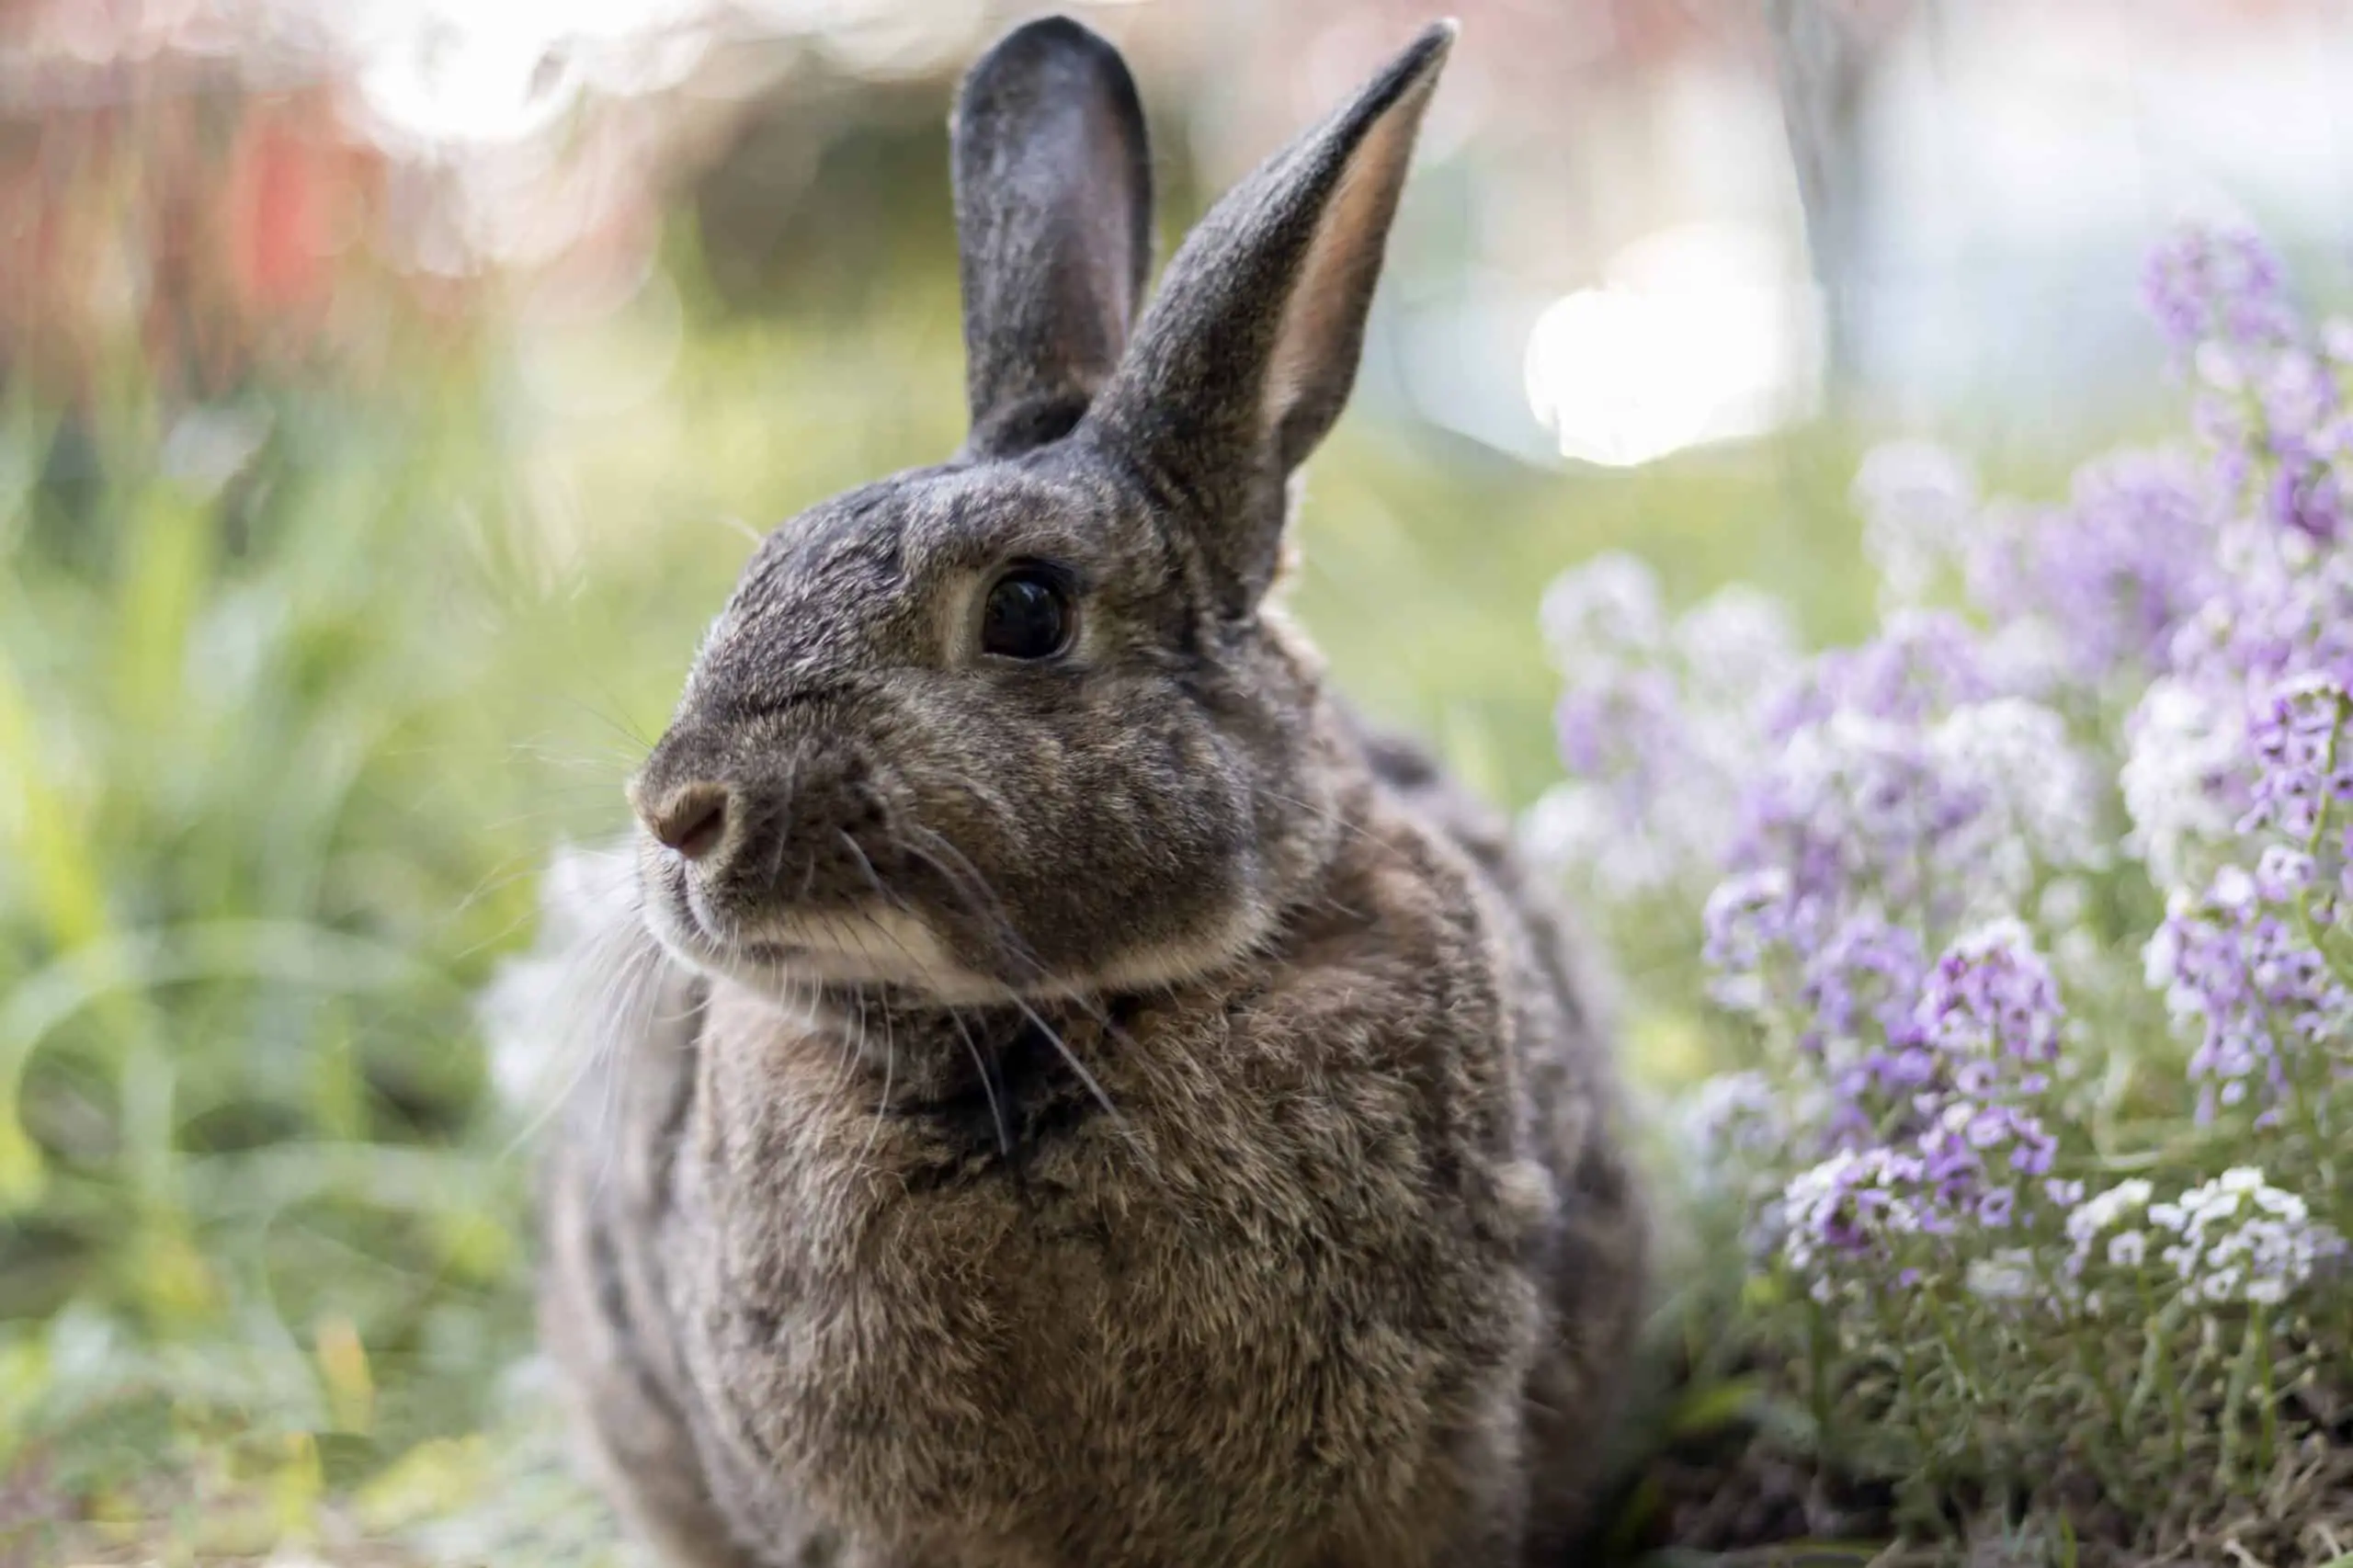 Look after your rabbit by using a pet-friendly weed killer